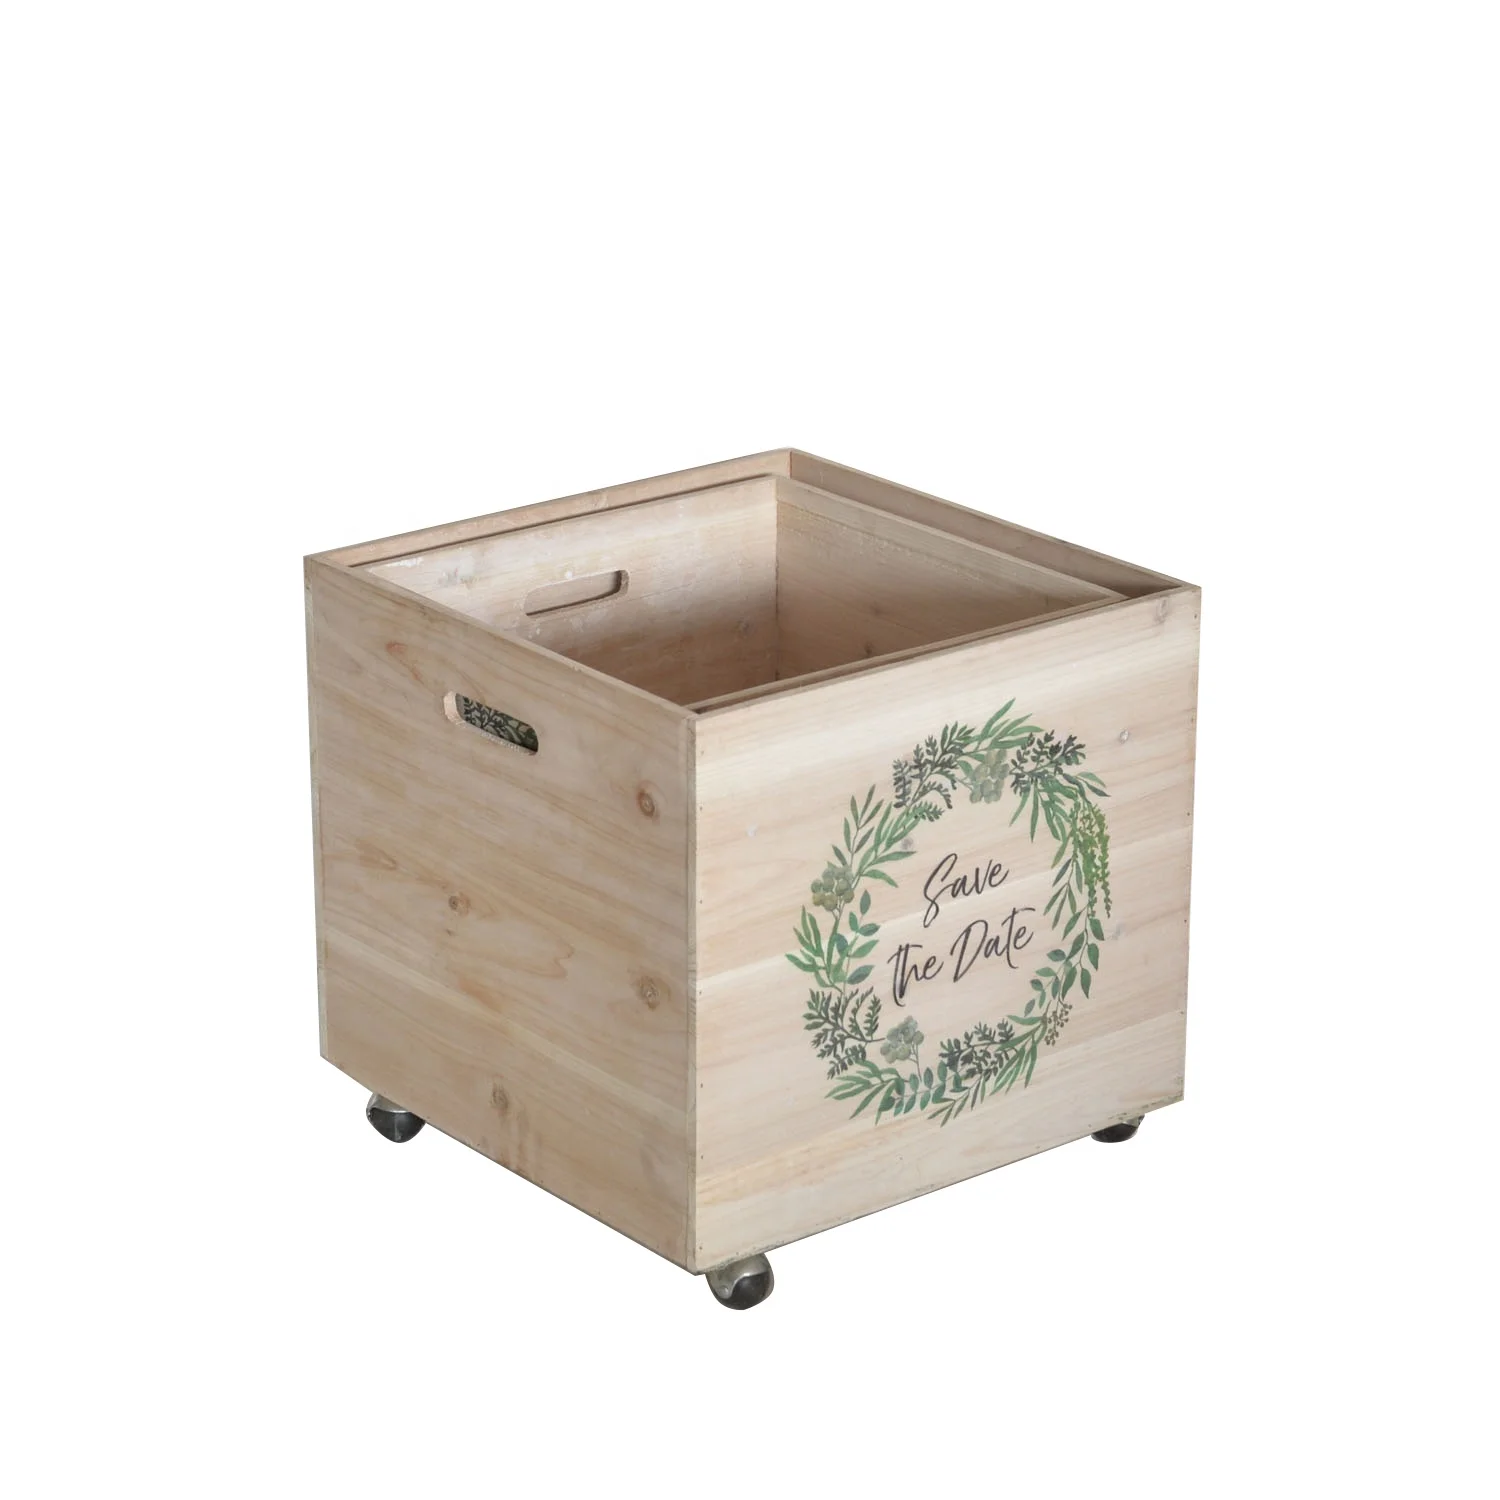 lid spanning Scepticisme Mayco Home Cheap Decorative Wooden Storage Wine Box Crates With 4 Wheels -  Buy Wooden Storage Box,Wooden Storage Crates,Wooden Wine Box Product on  Alibaba.com